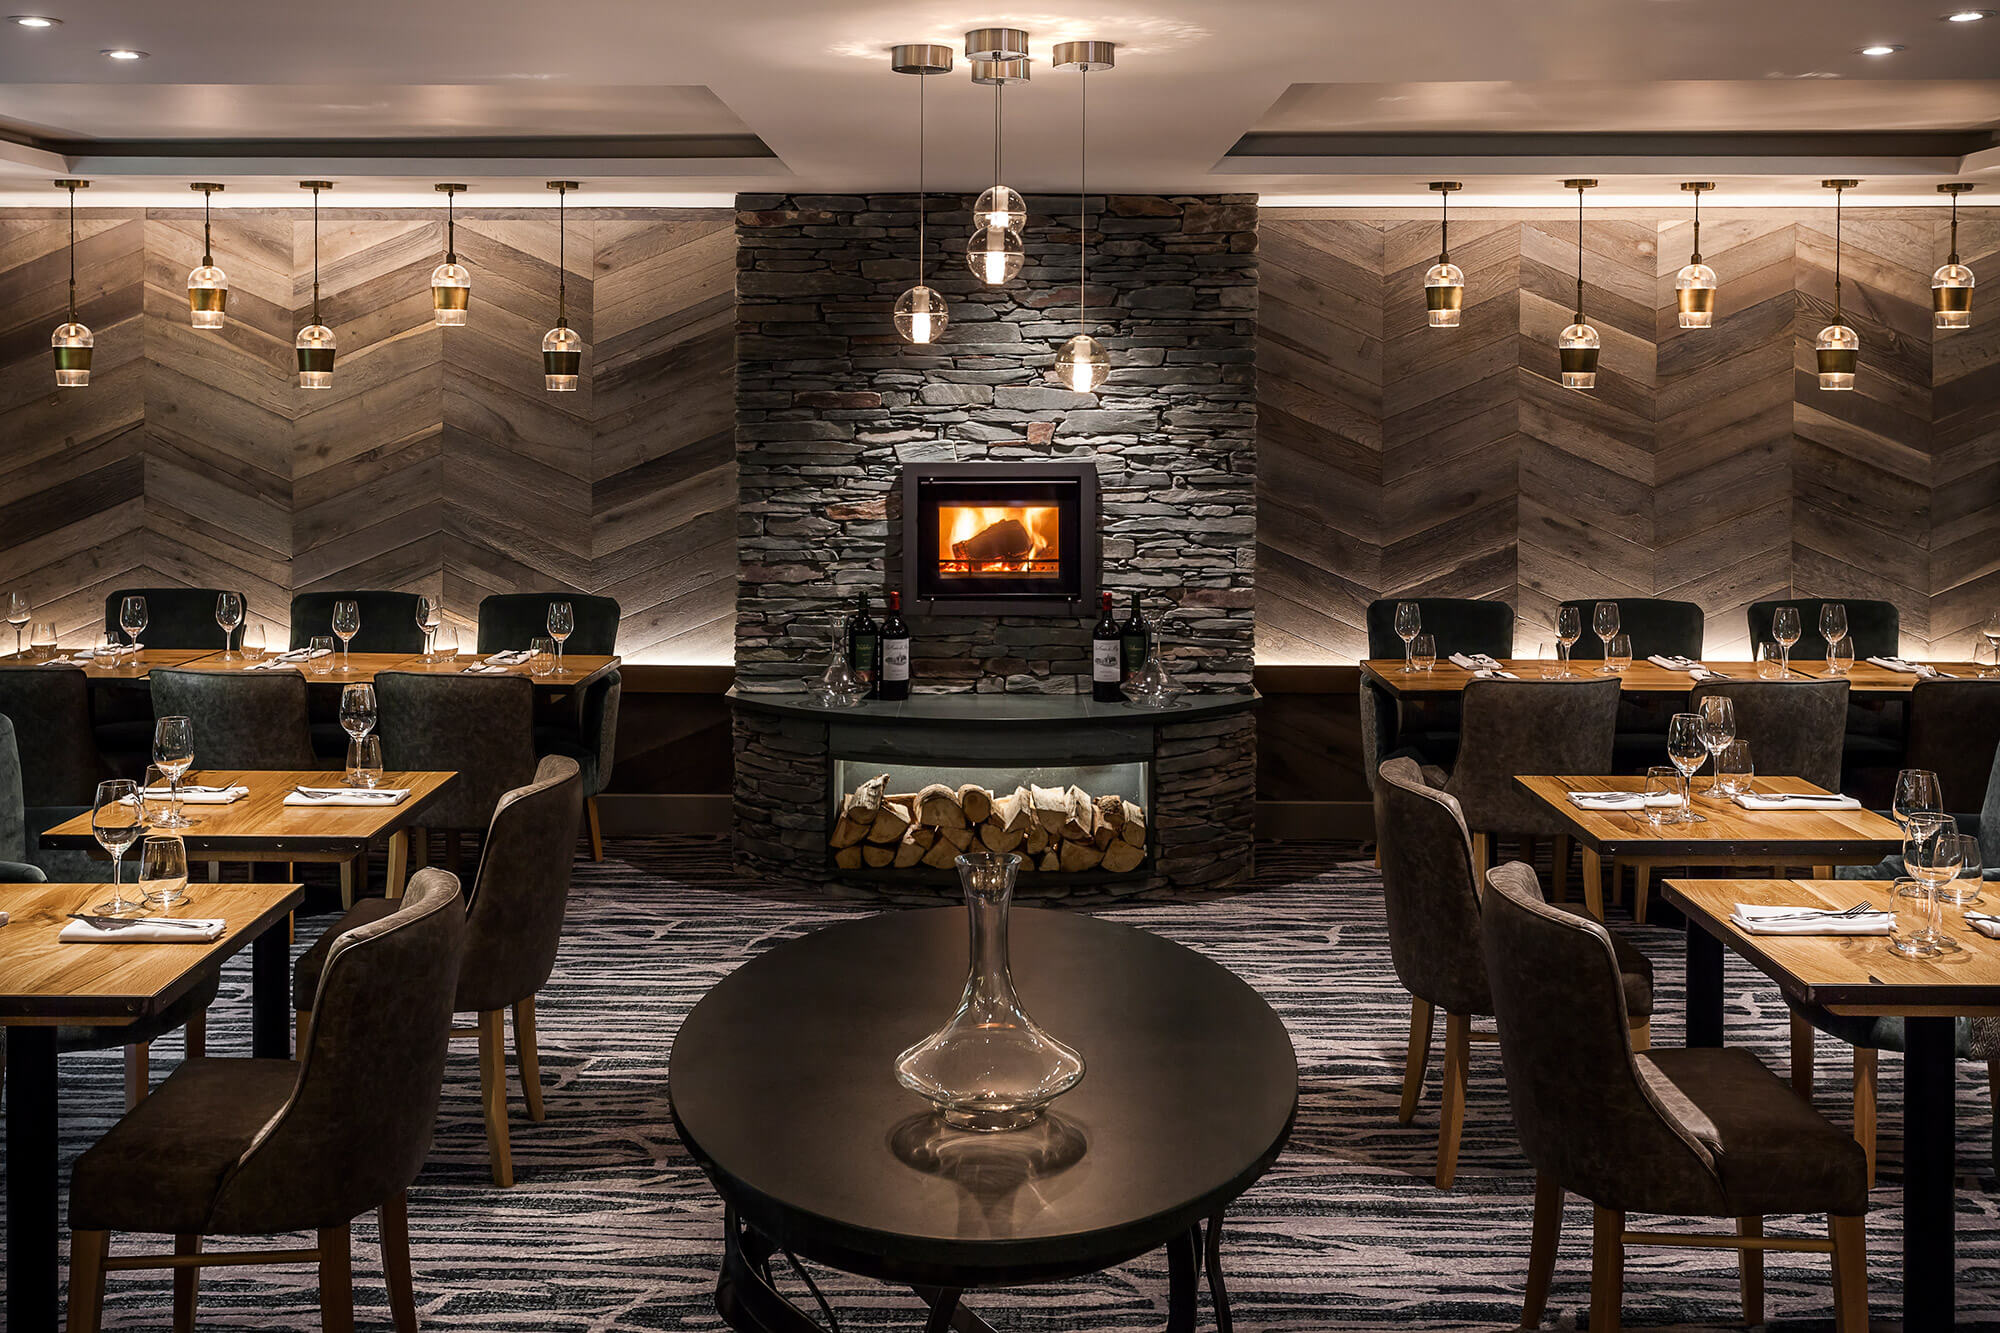 Stove Restaurant & Bar at The Langdale Hotel in The Lake District